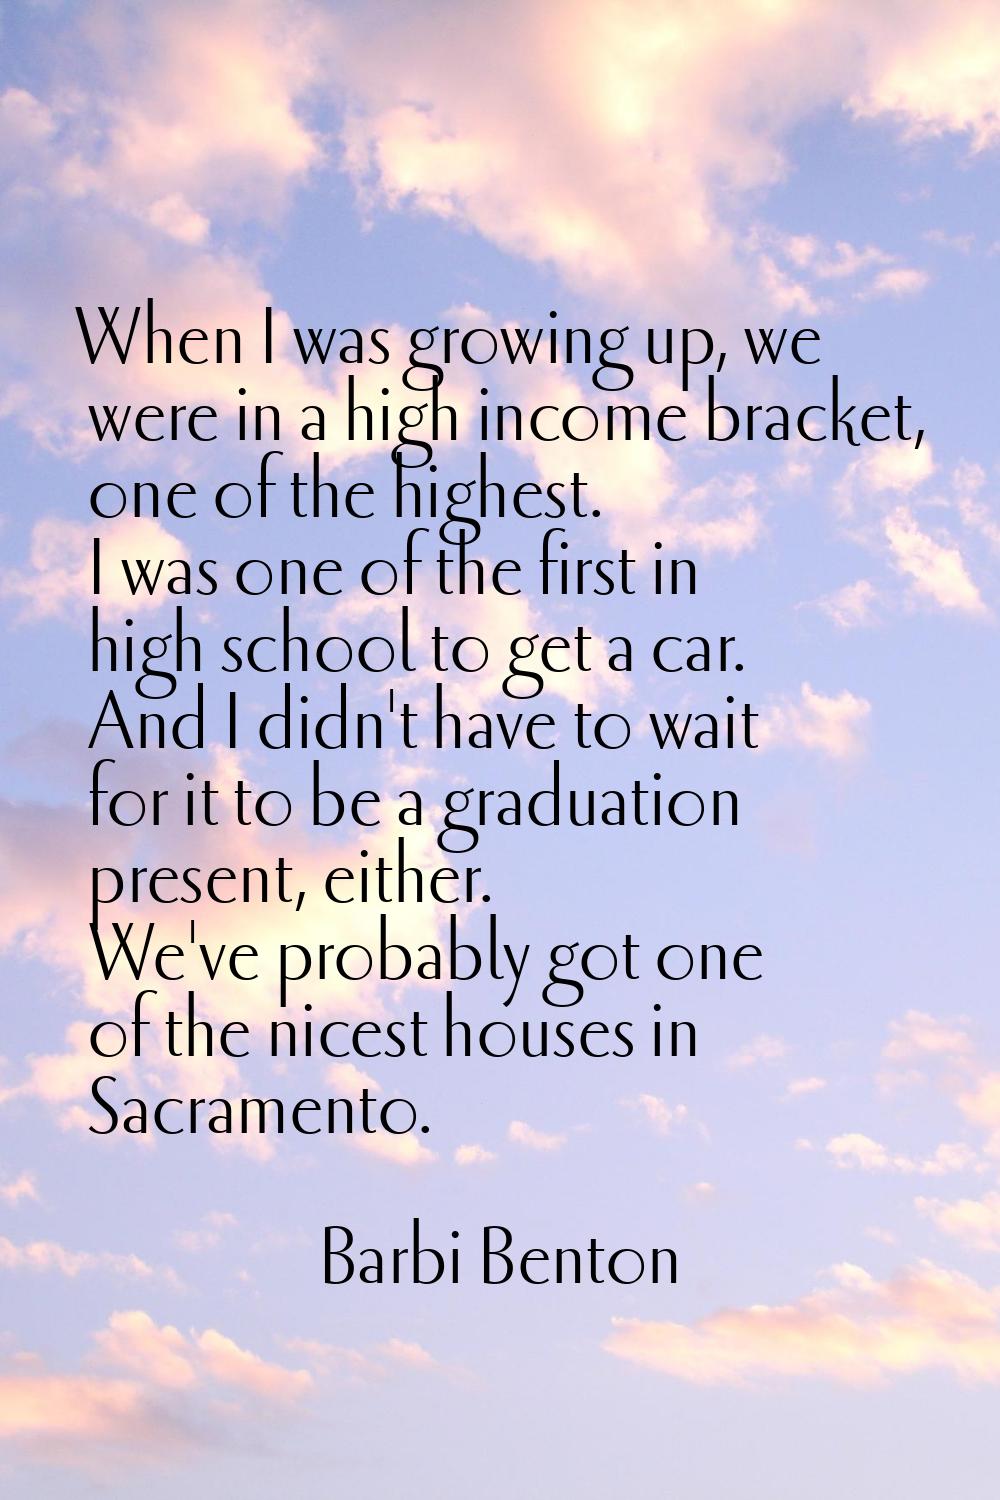 When I was growing up, we were in a high income bracket, one of the highest. I was one of the first